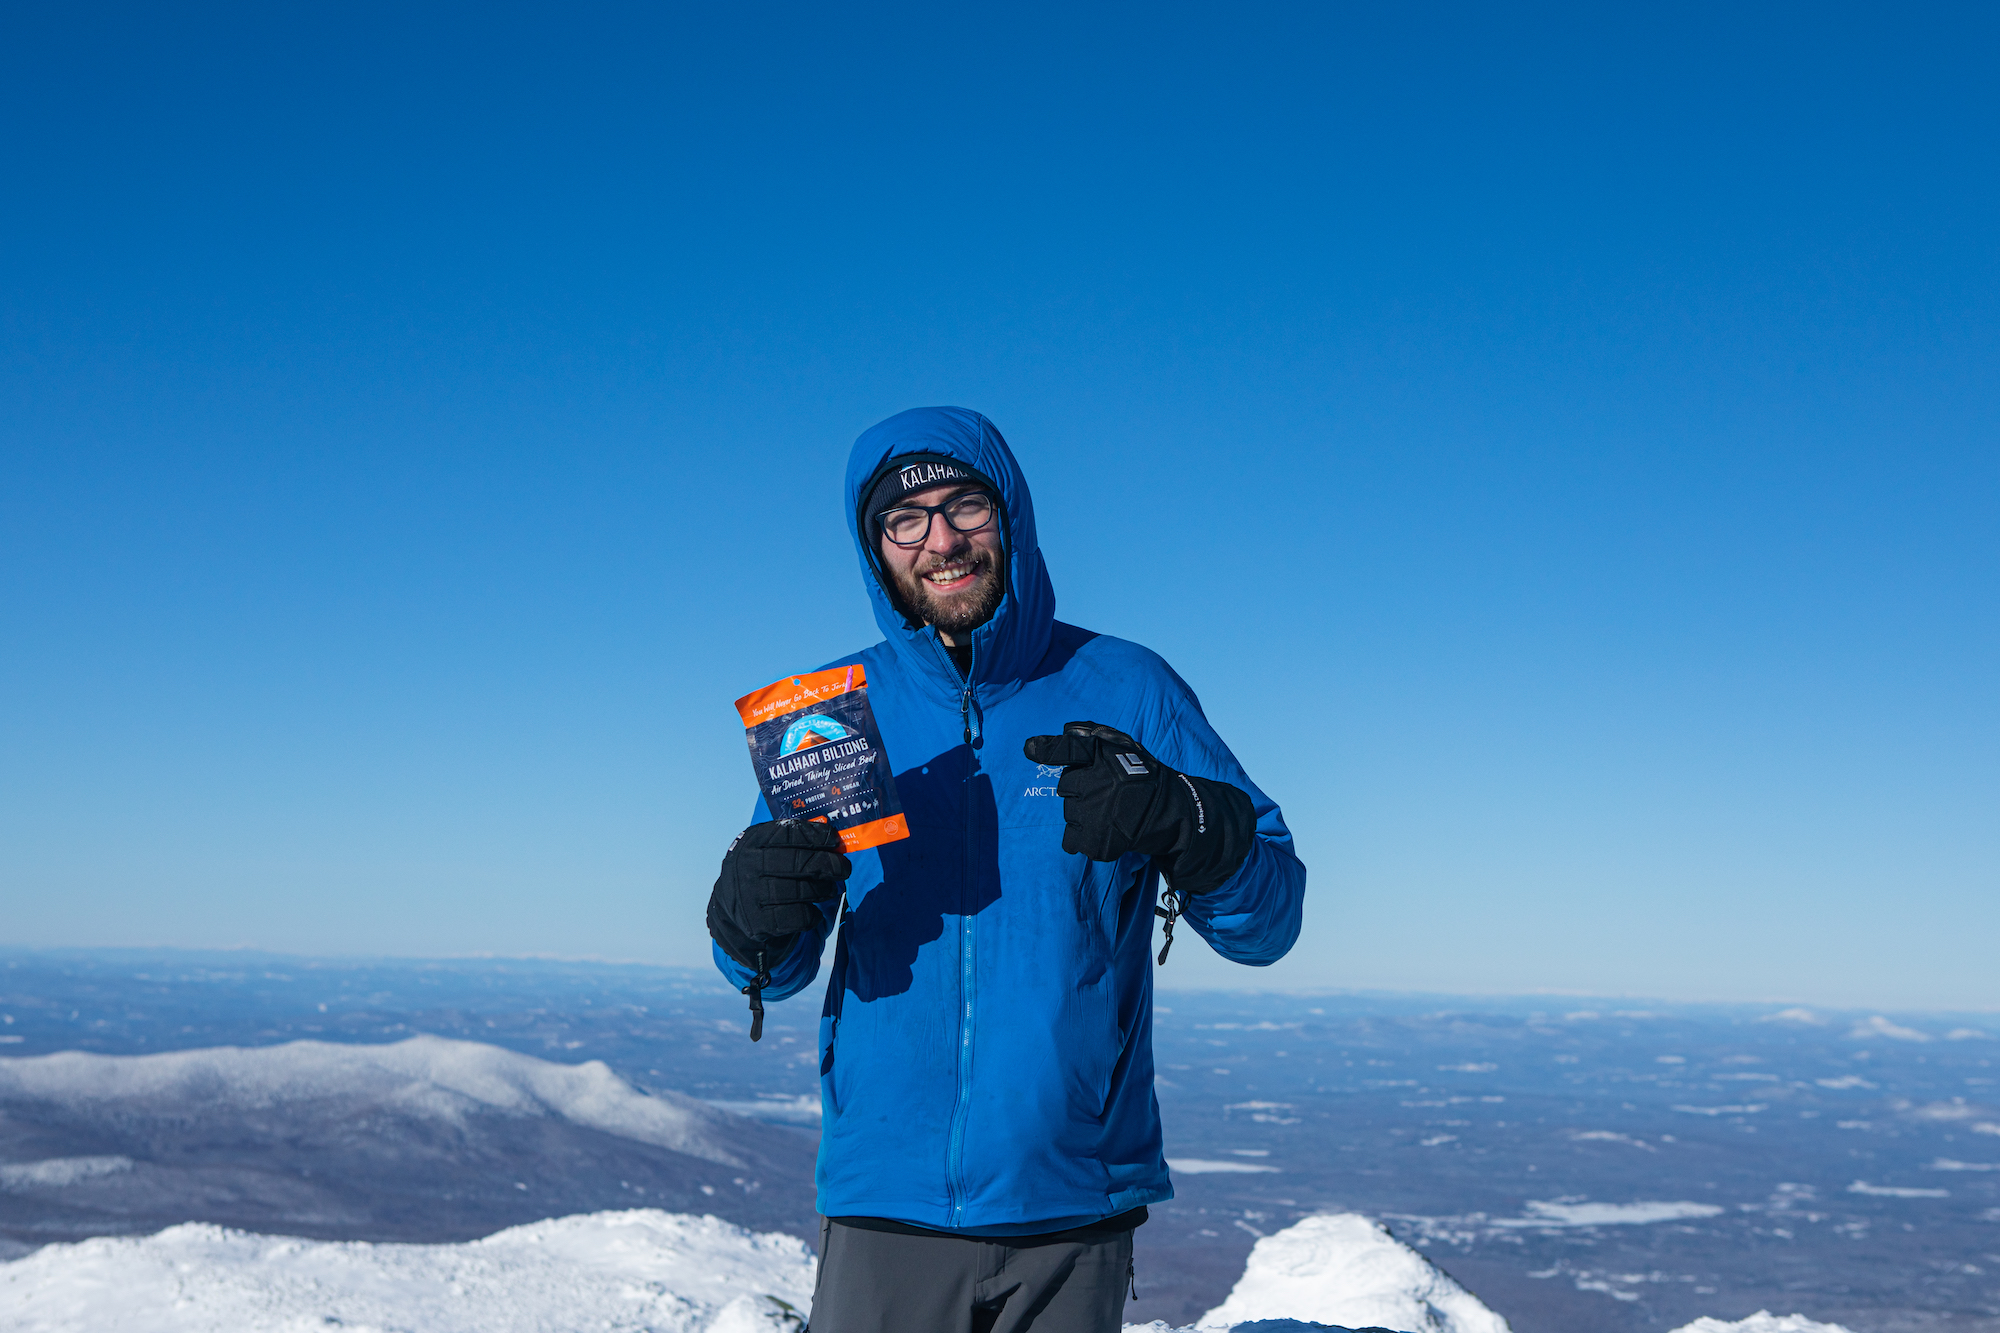 man with blue jacket stands on mountain top with bag of Kalahari in hand